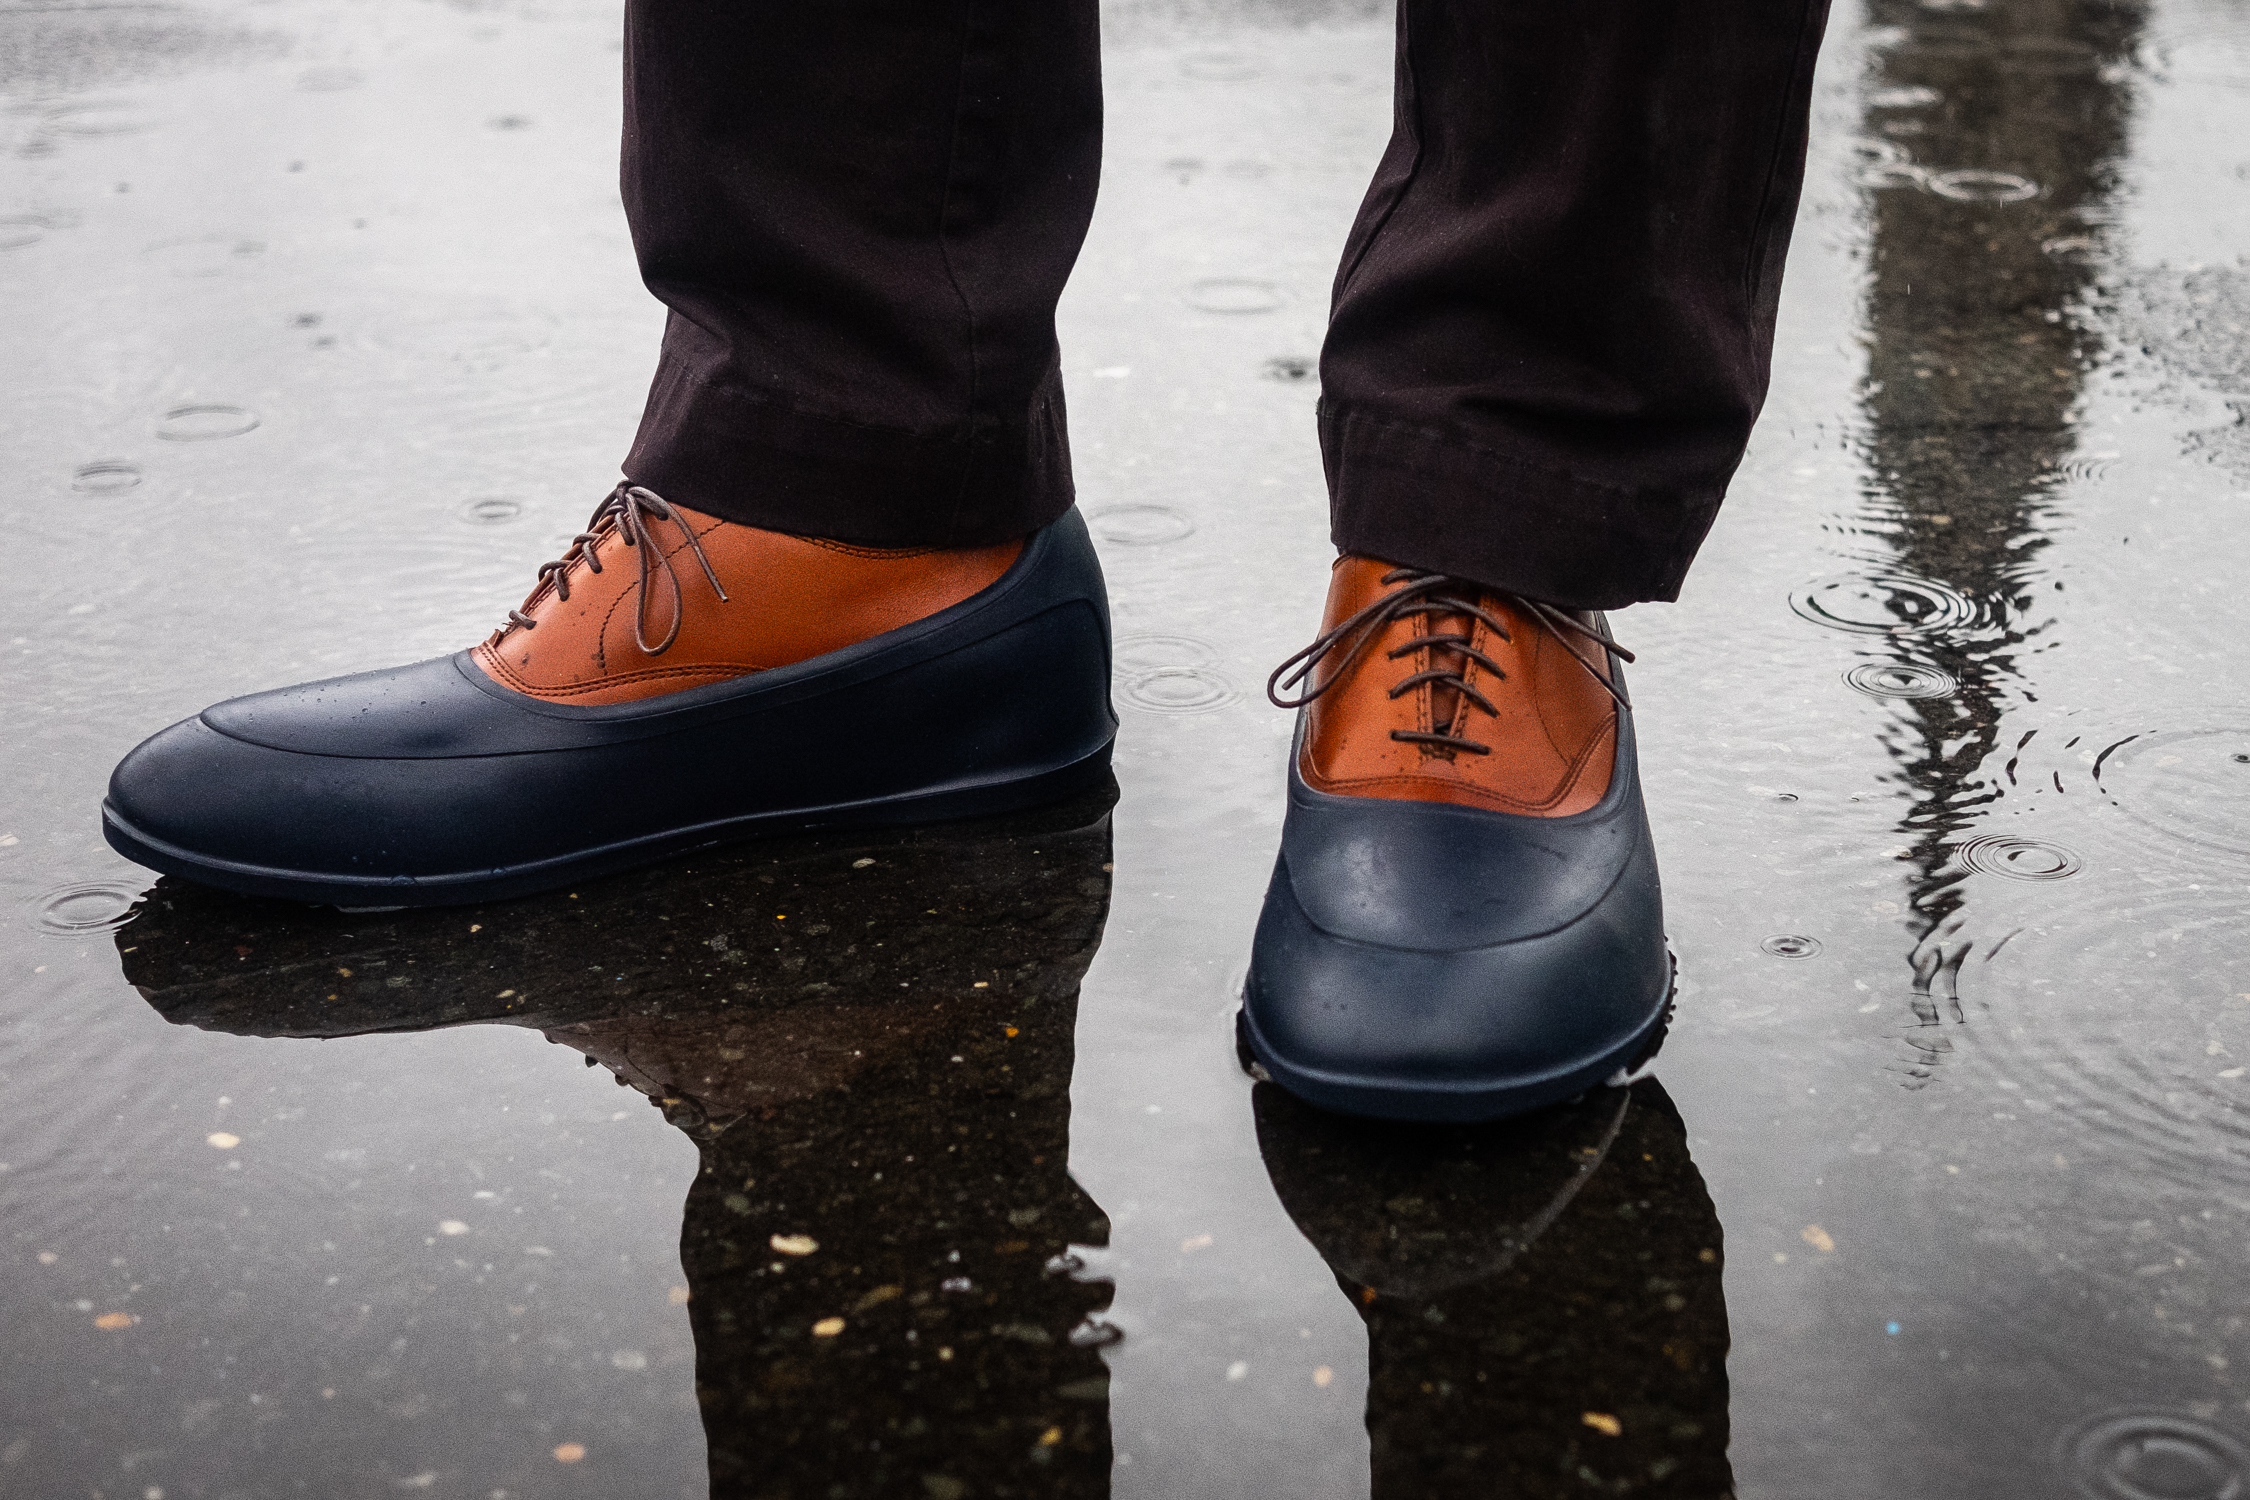 SWIMS Galoshes Protect Your Alden Dress 